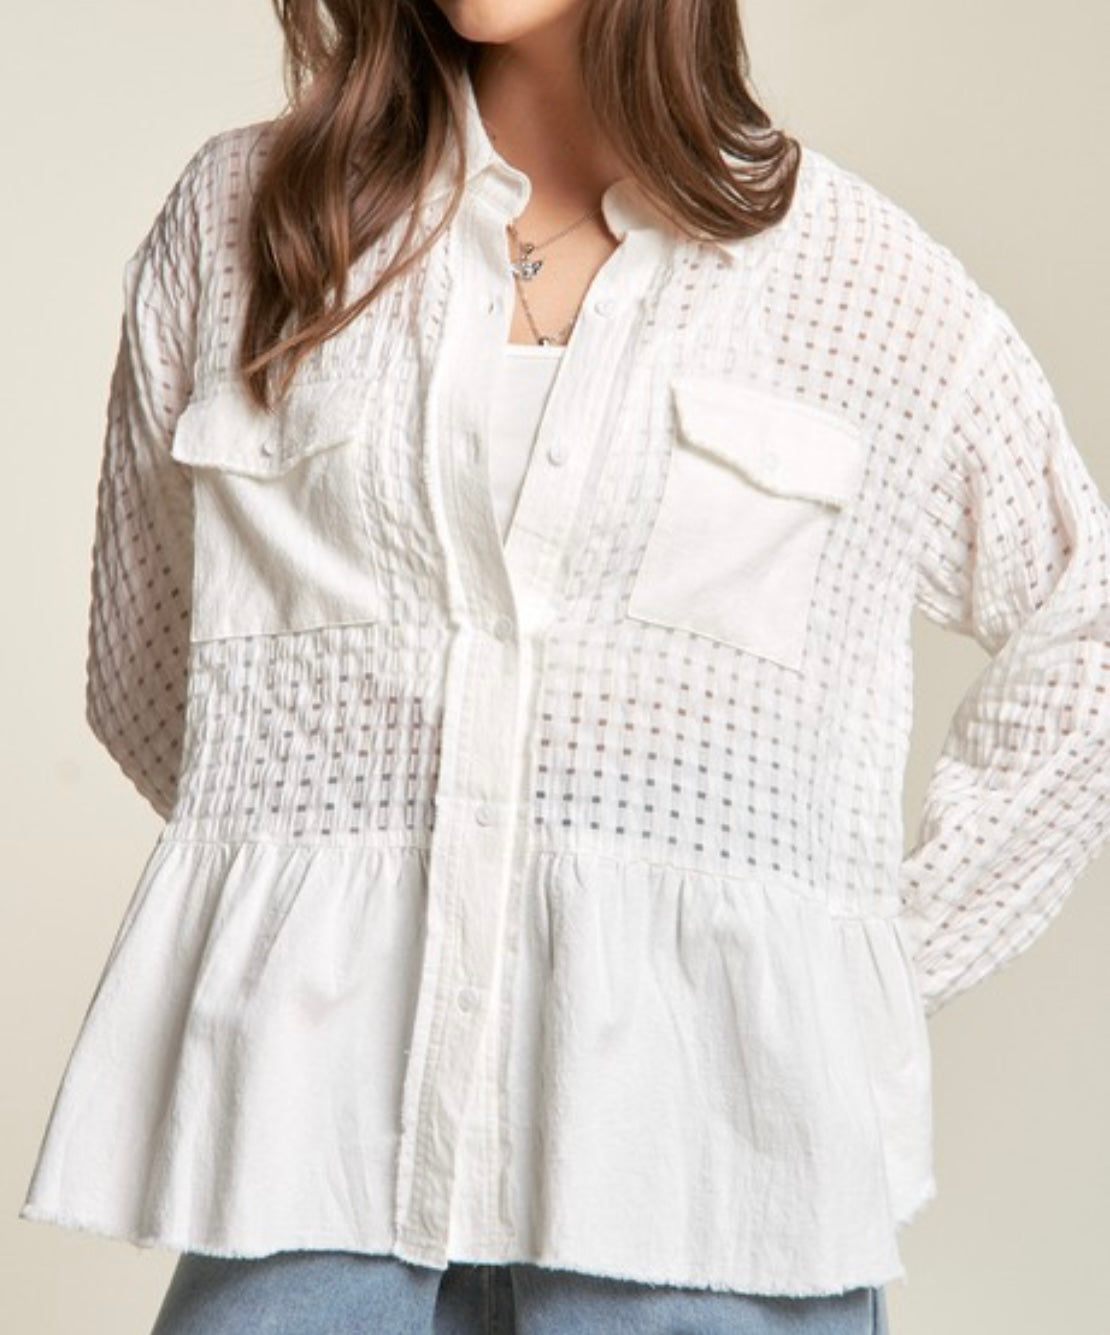 White button down blouse with net inserts & flounce bottom (ALSO AVAILABLE IN PLUS SIZES)